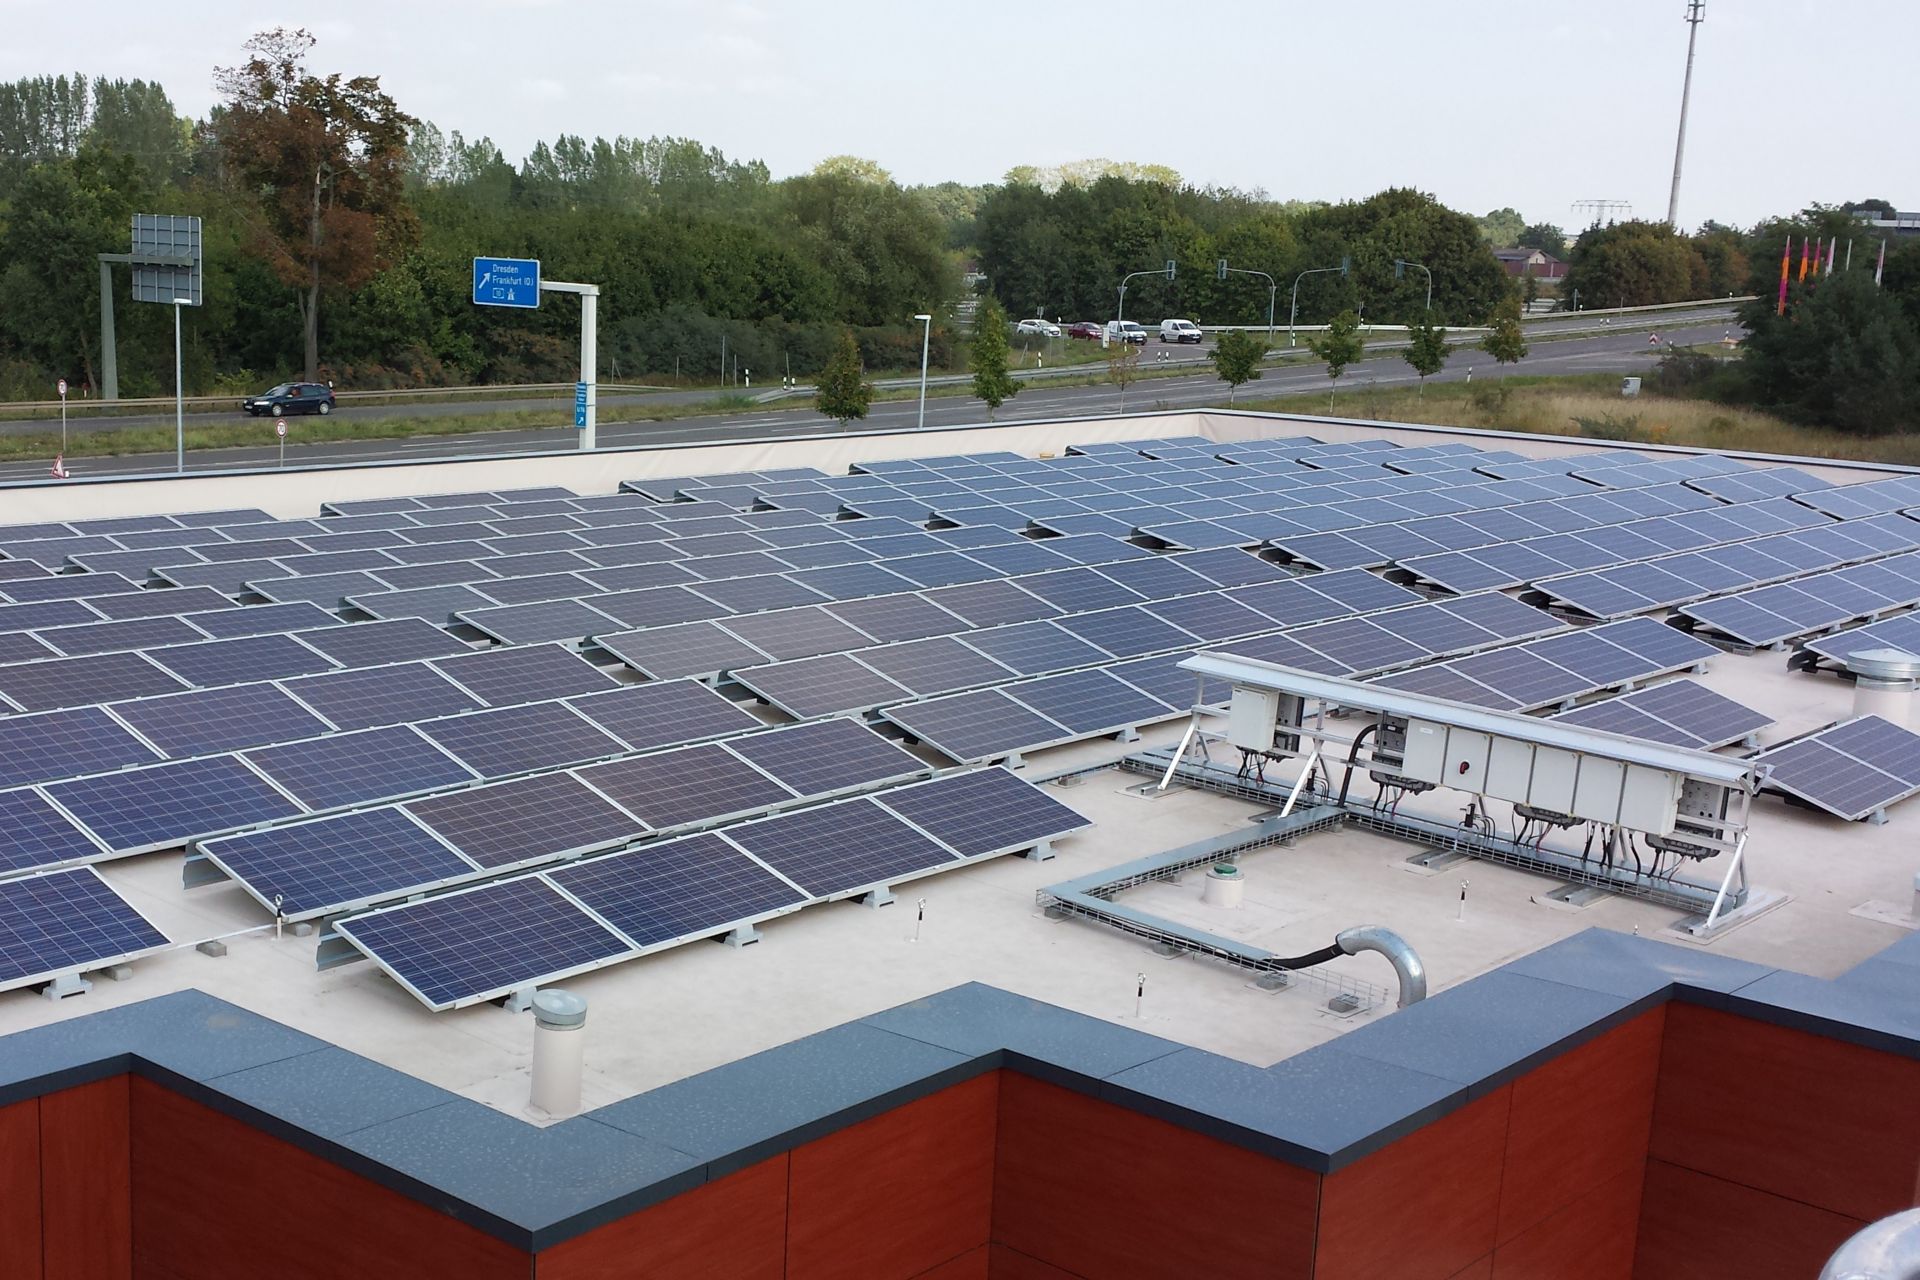 Sika SolarMount-1 on solar roof installed in south configuration in Fredersdorf, Germany